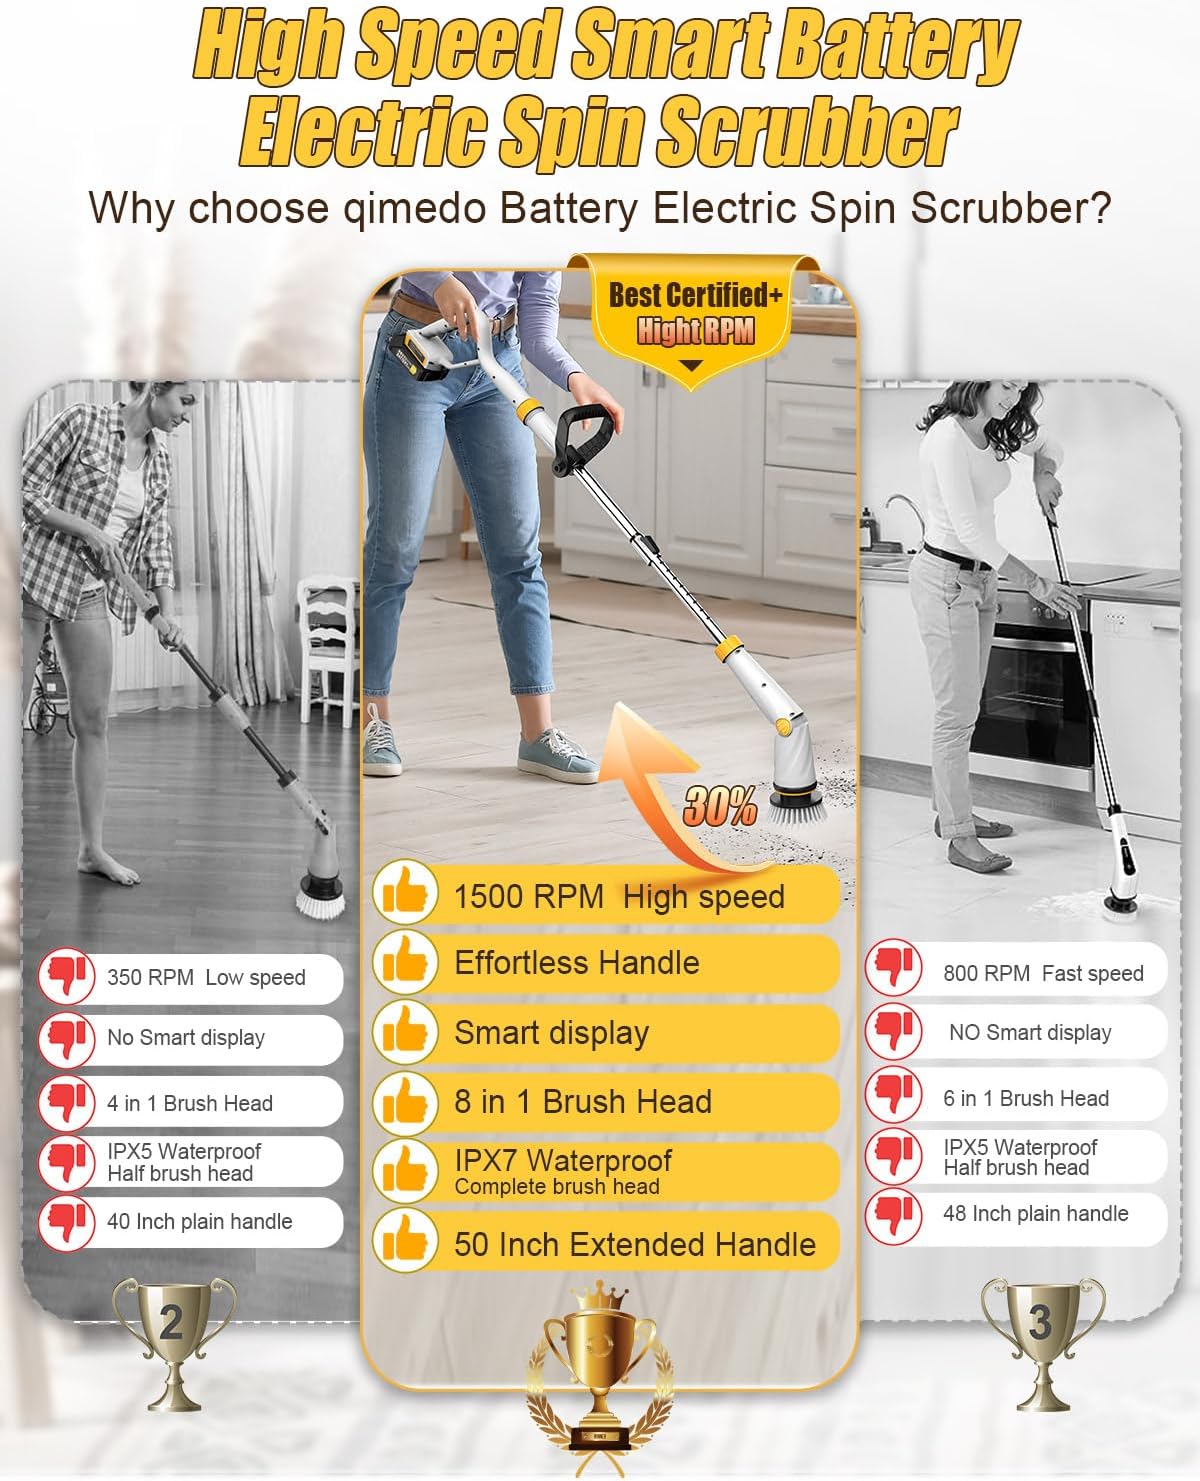 Qimedo Electric Spin Scrubber with Two Batteries 1500 RPM High Power Electric Scrubber for Cleaning